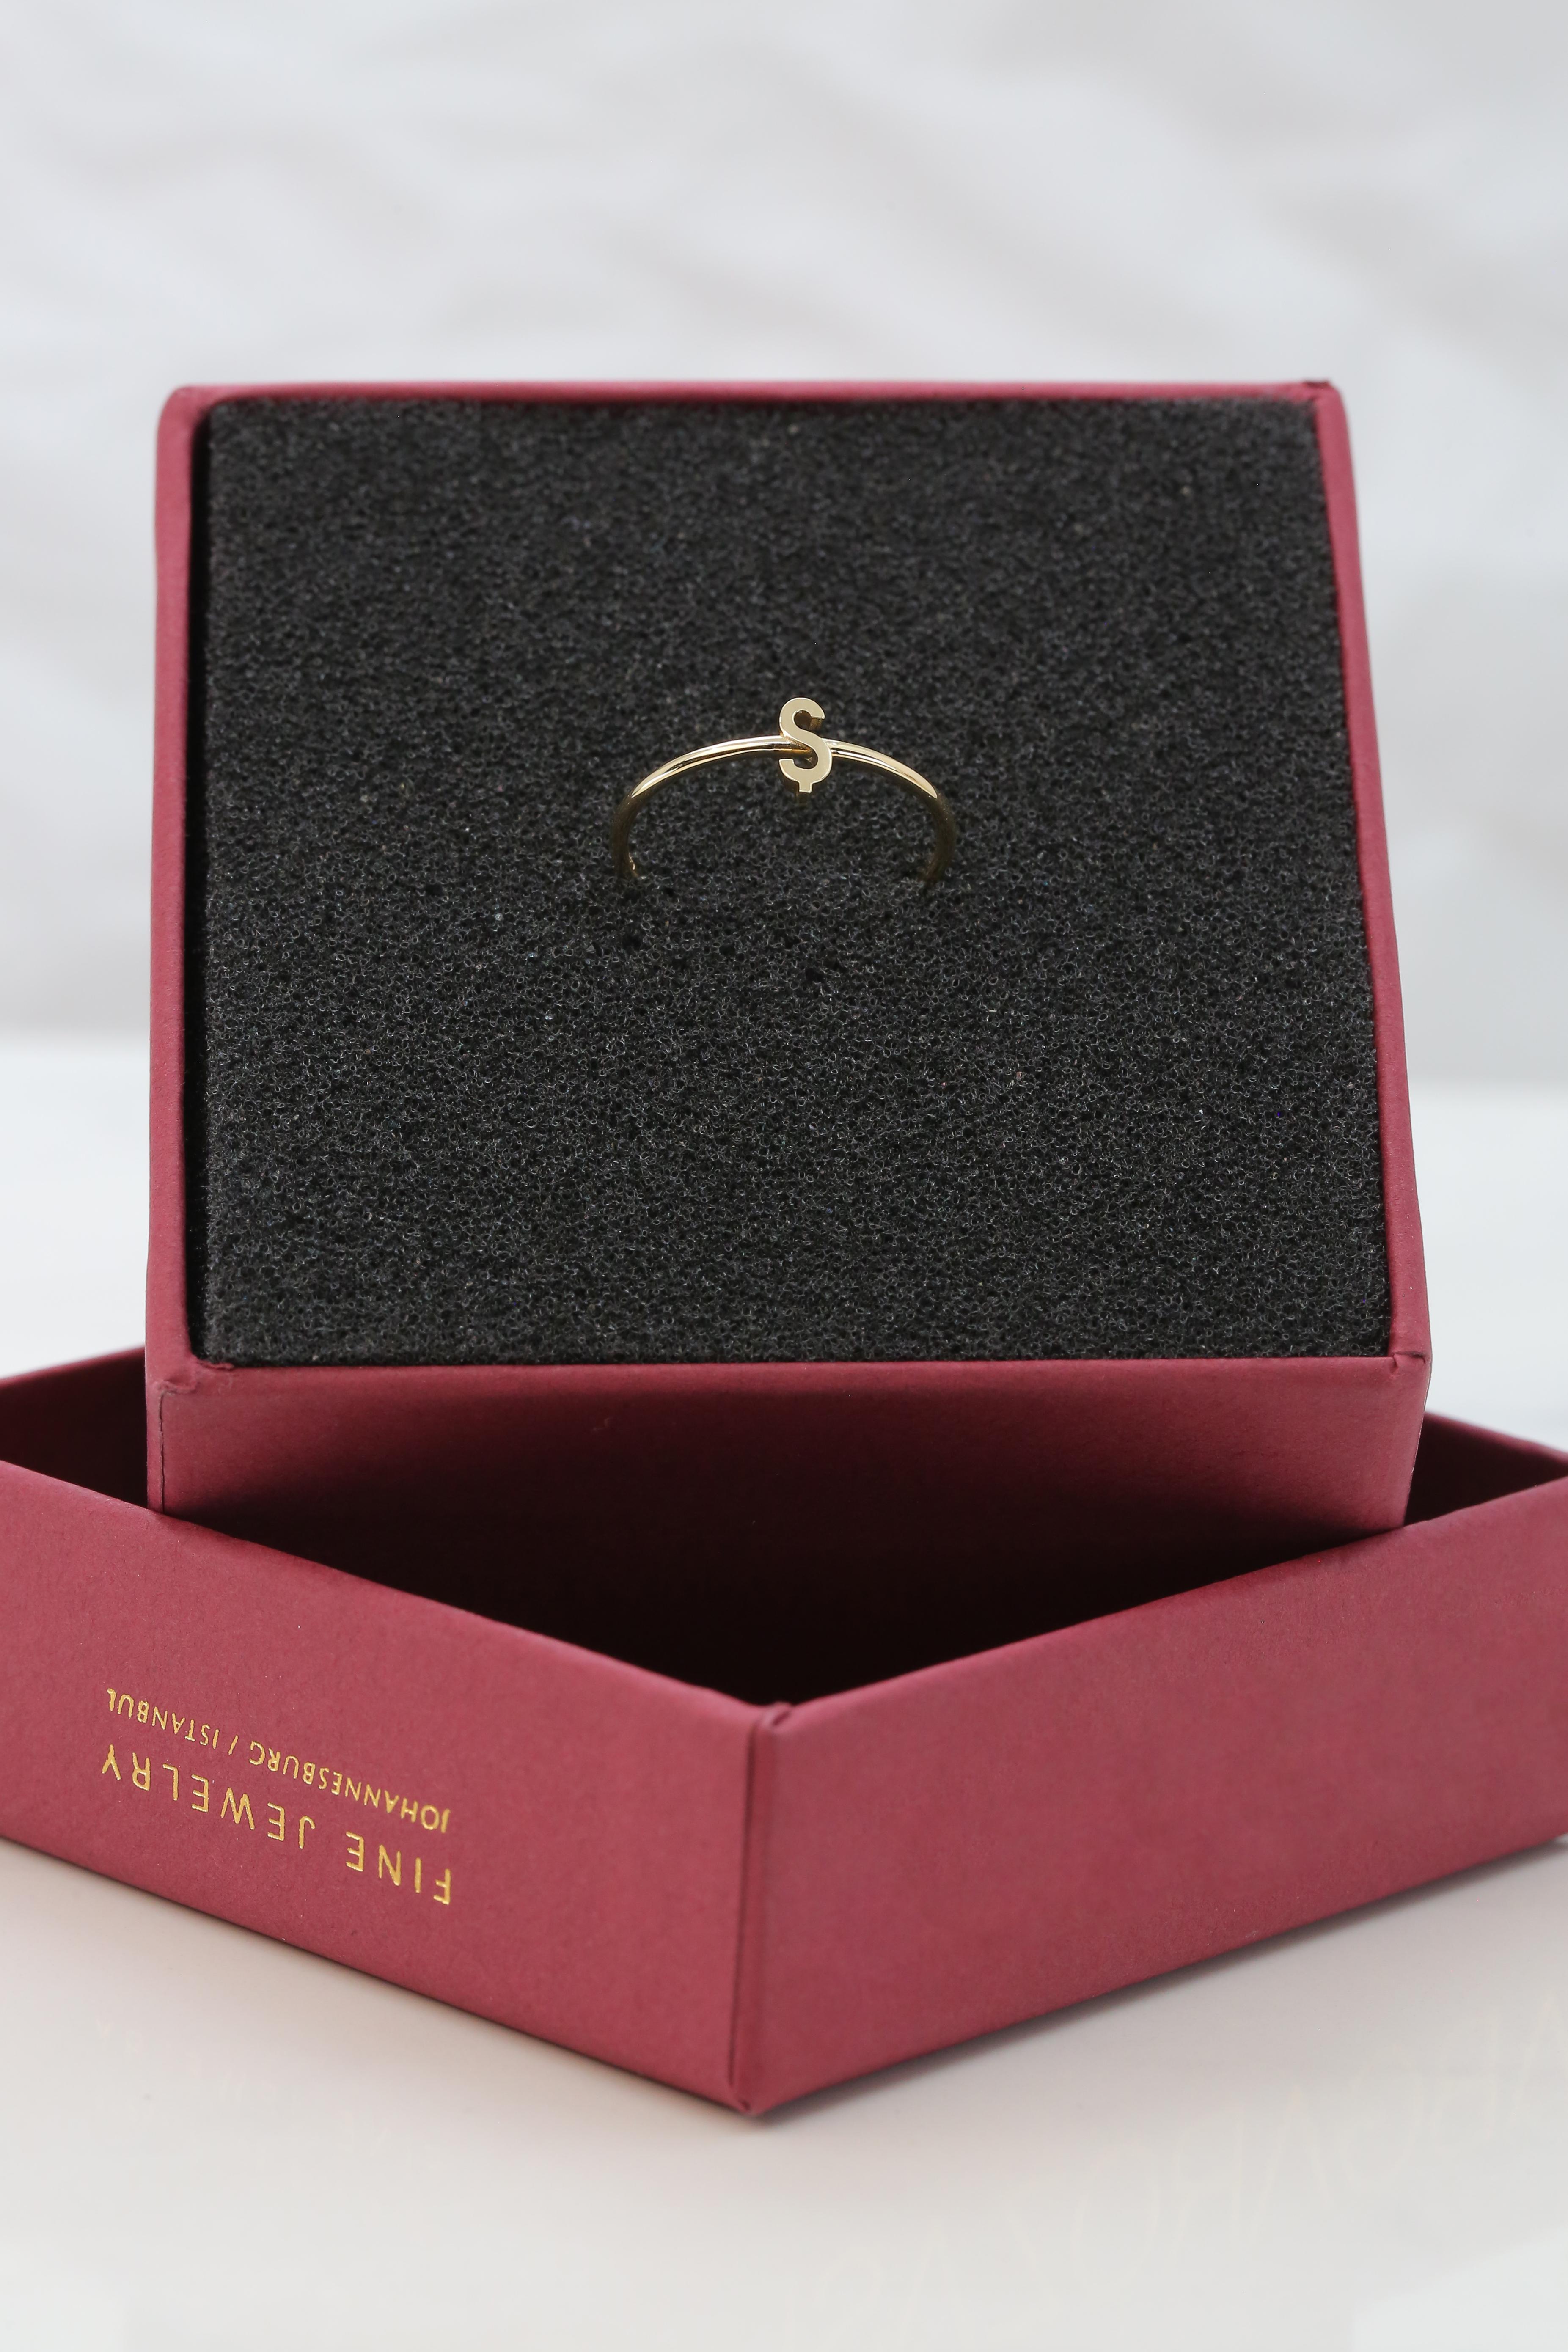 For Sale:  14K Gold Initial Ş Letter Ring, Personalized Initial Letter Ring 6